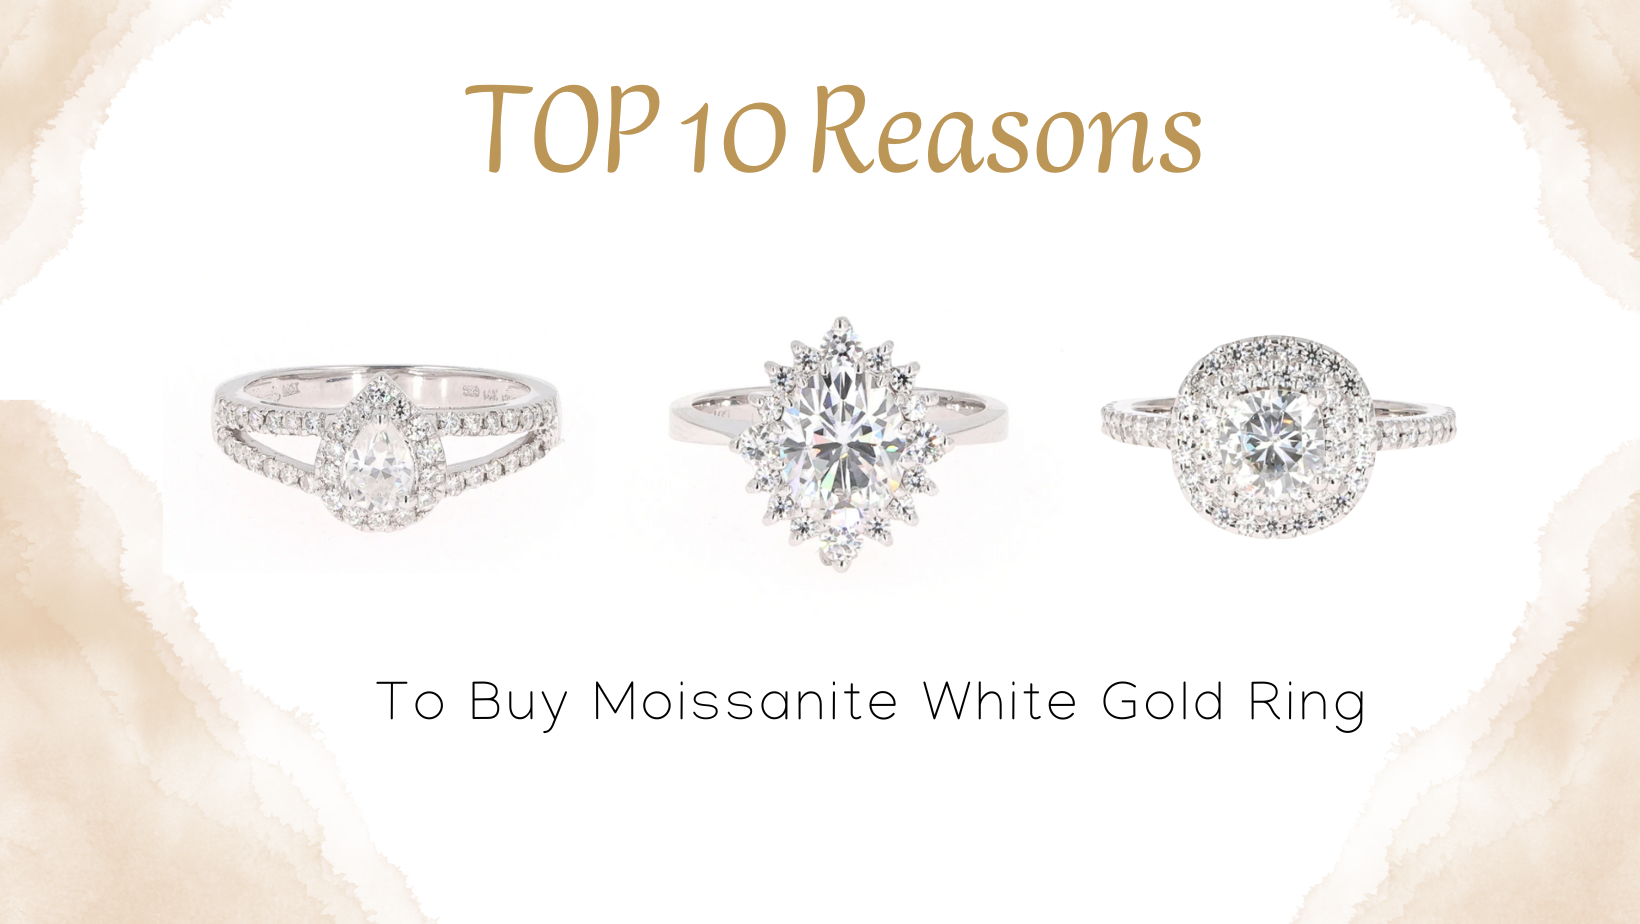 10 Reasons to Buy a Moissanite White Gold Ring